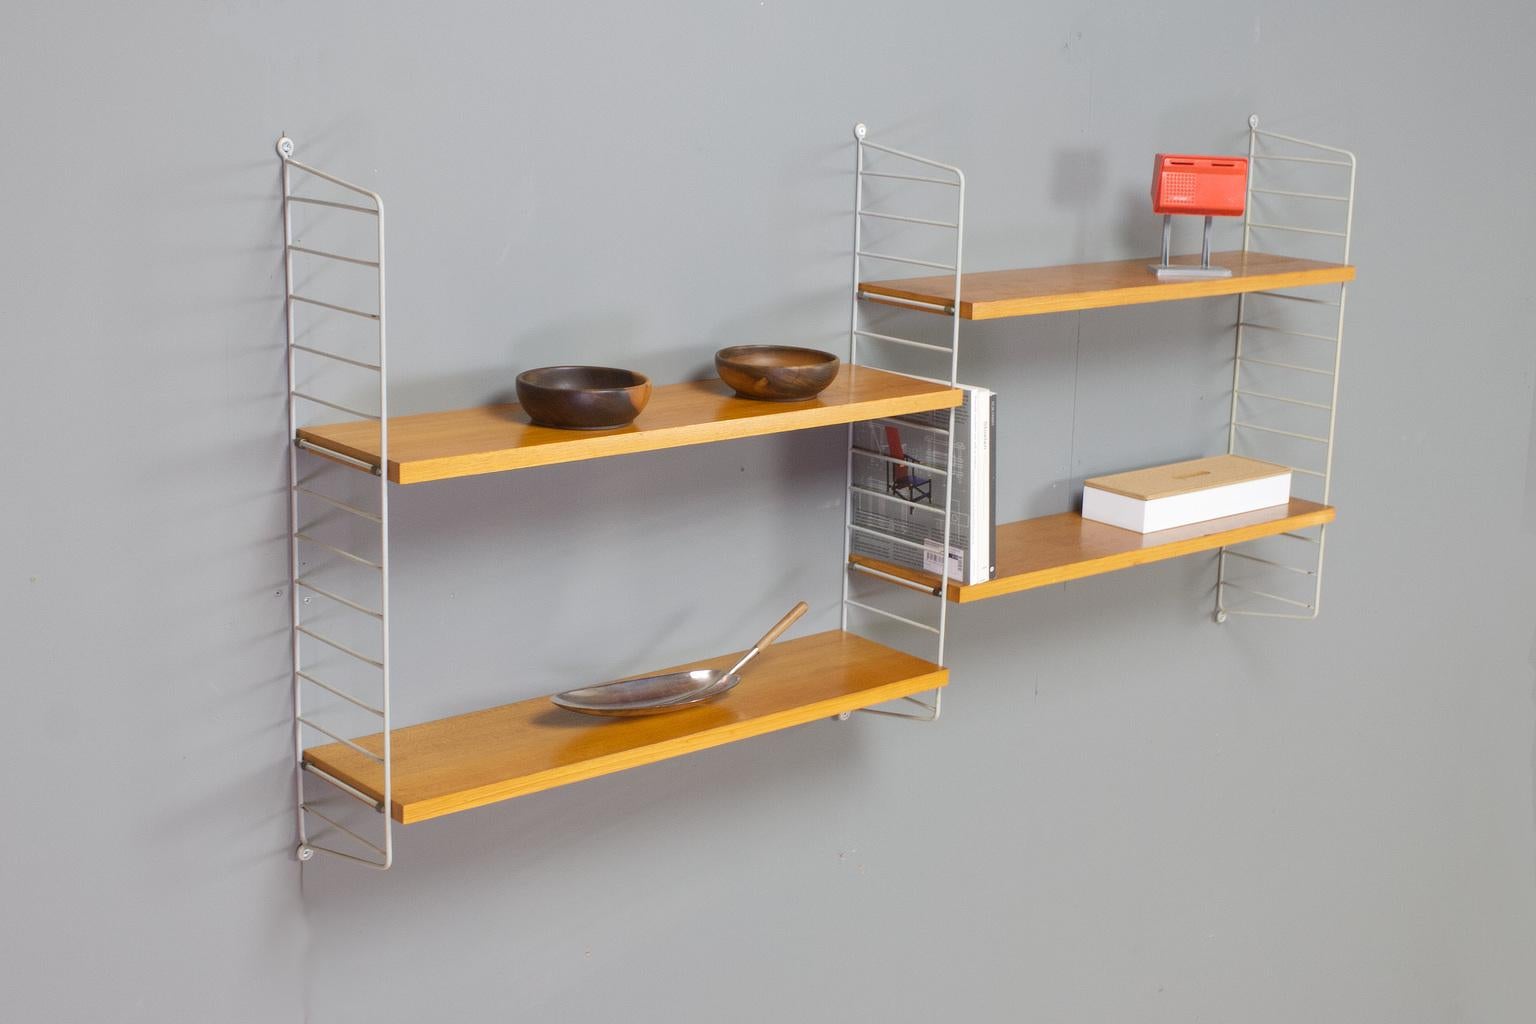 Original vintage adjustable shelving unit by String Sweden. This modulair wall system consist of four birch shelves and three grey coated (metal wire) brackets. The shelves can be placed in any given height. The unit is in great vintage condition,